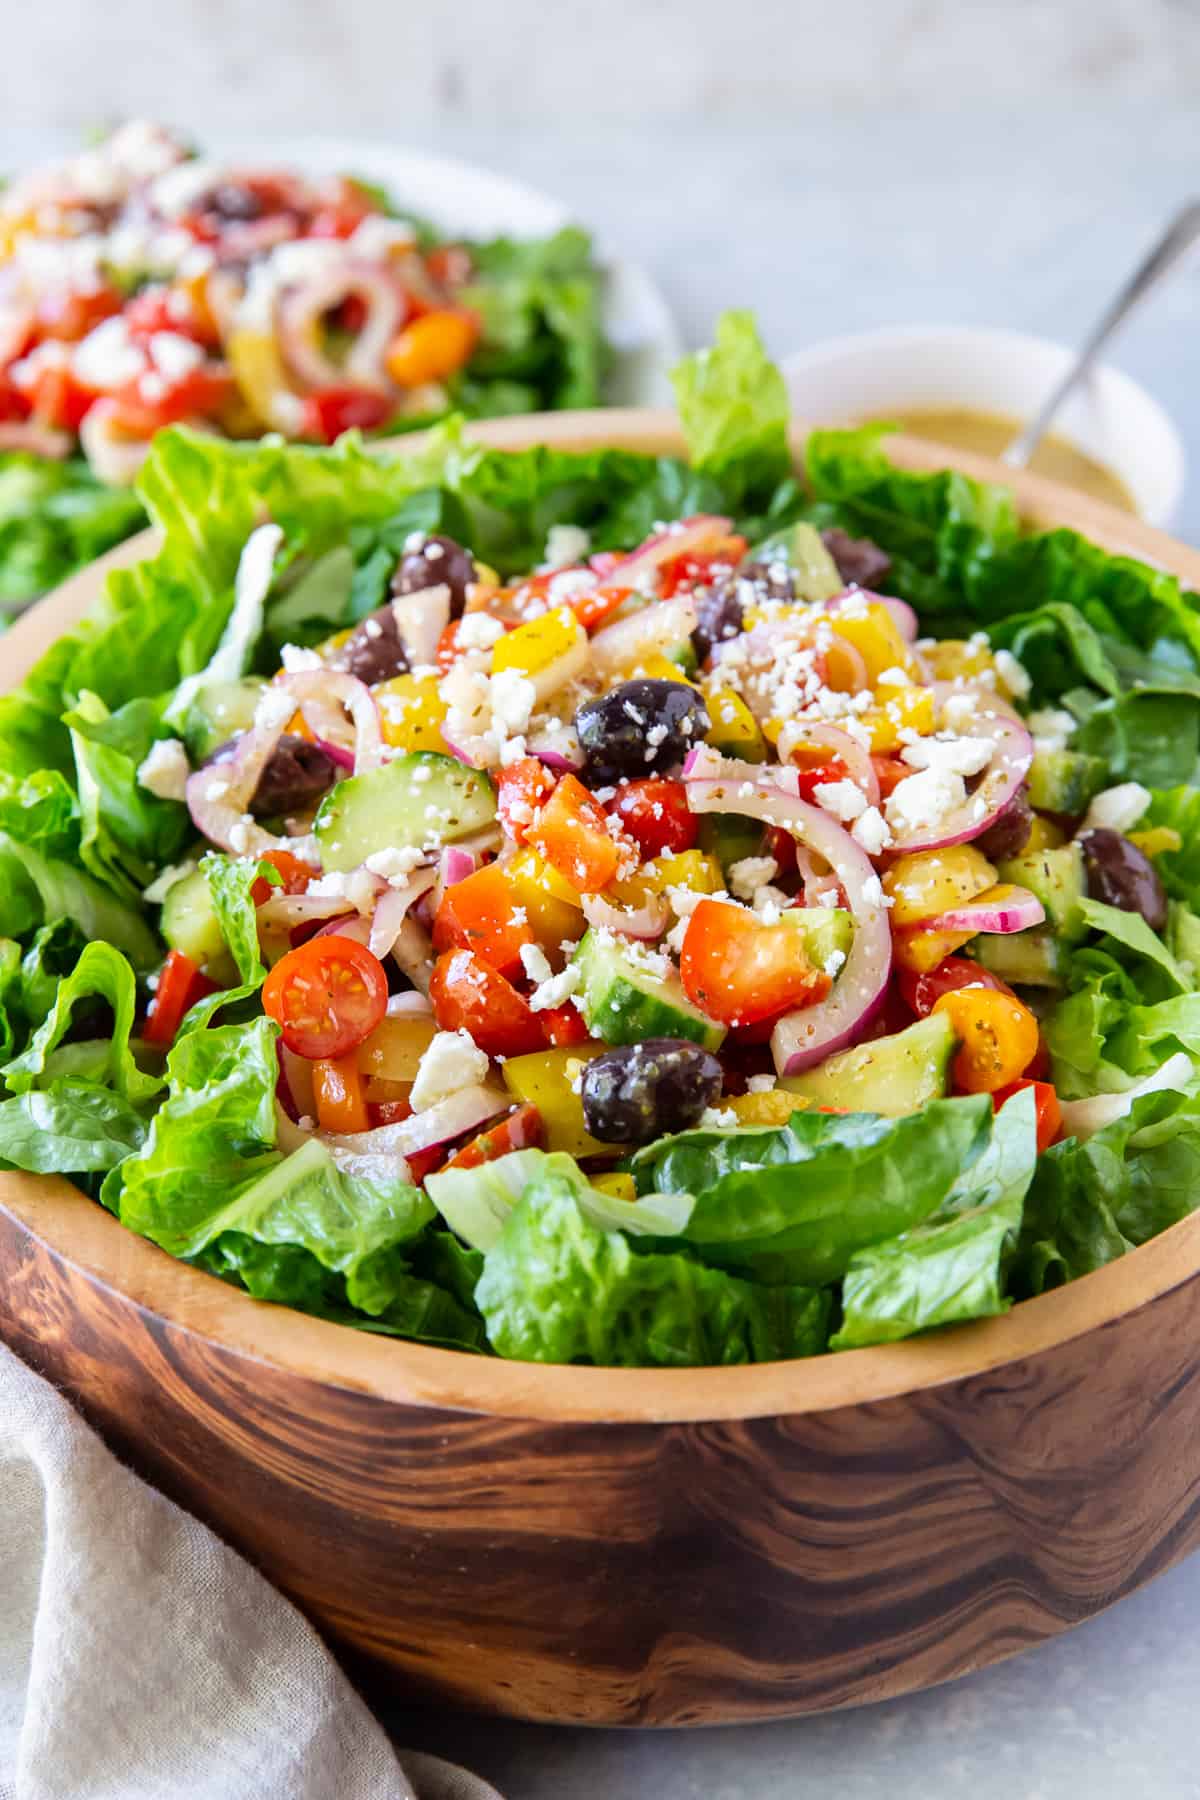 Greek Salad with tomatoes, onions, and kalamata olives in a wooden bowl.